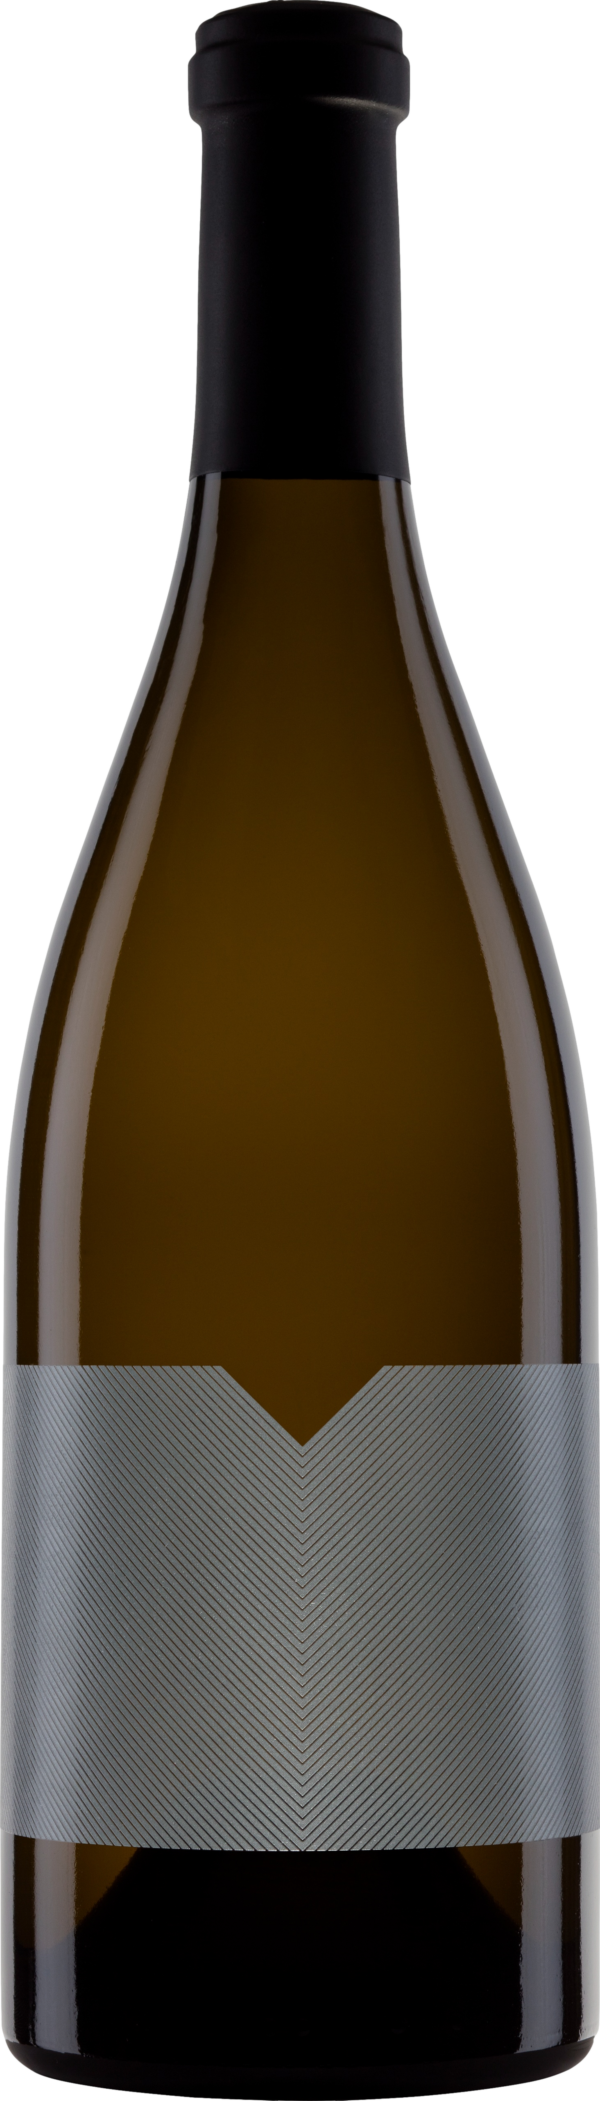 Product image of Merryvale Silhouette Chardonnay 2020 from 8wines